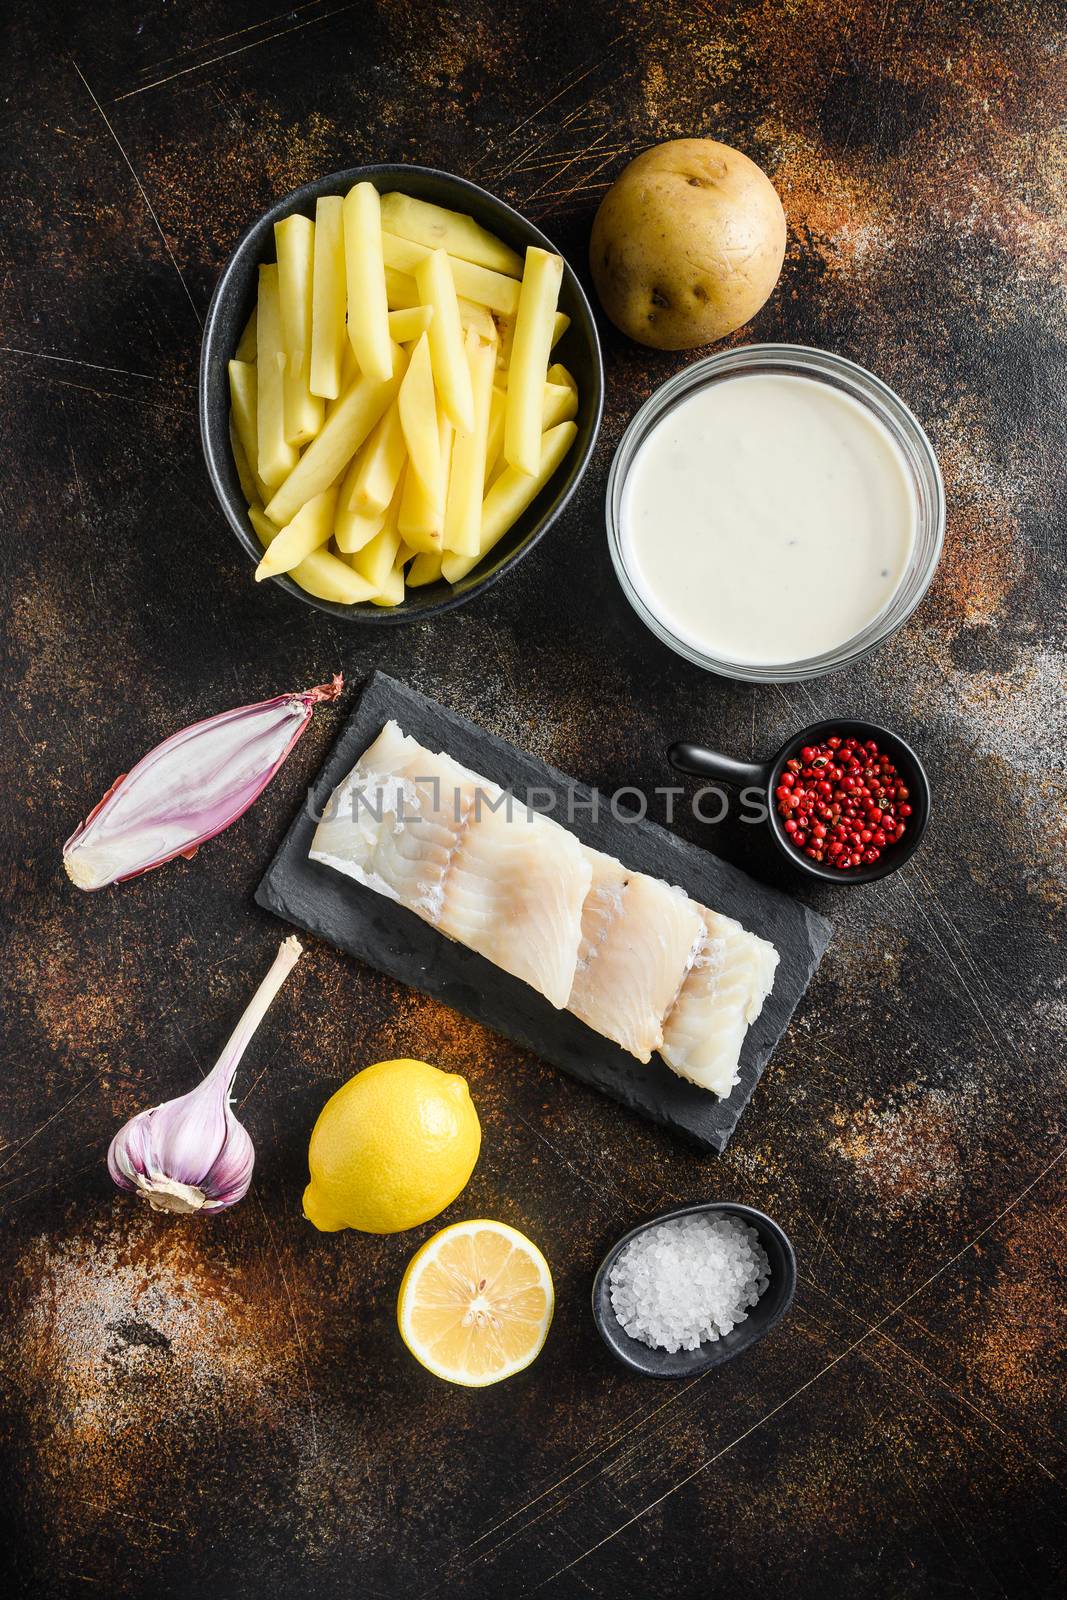 Raw cod fillet and other organic ingredients recipe fish and chips and beer batter, potatoe, shallotgarlic, salt, peppercorns on rustic metal textured surface or table top view by Ilianesolenyi